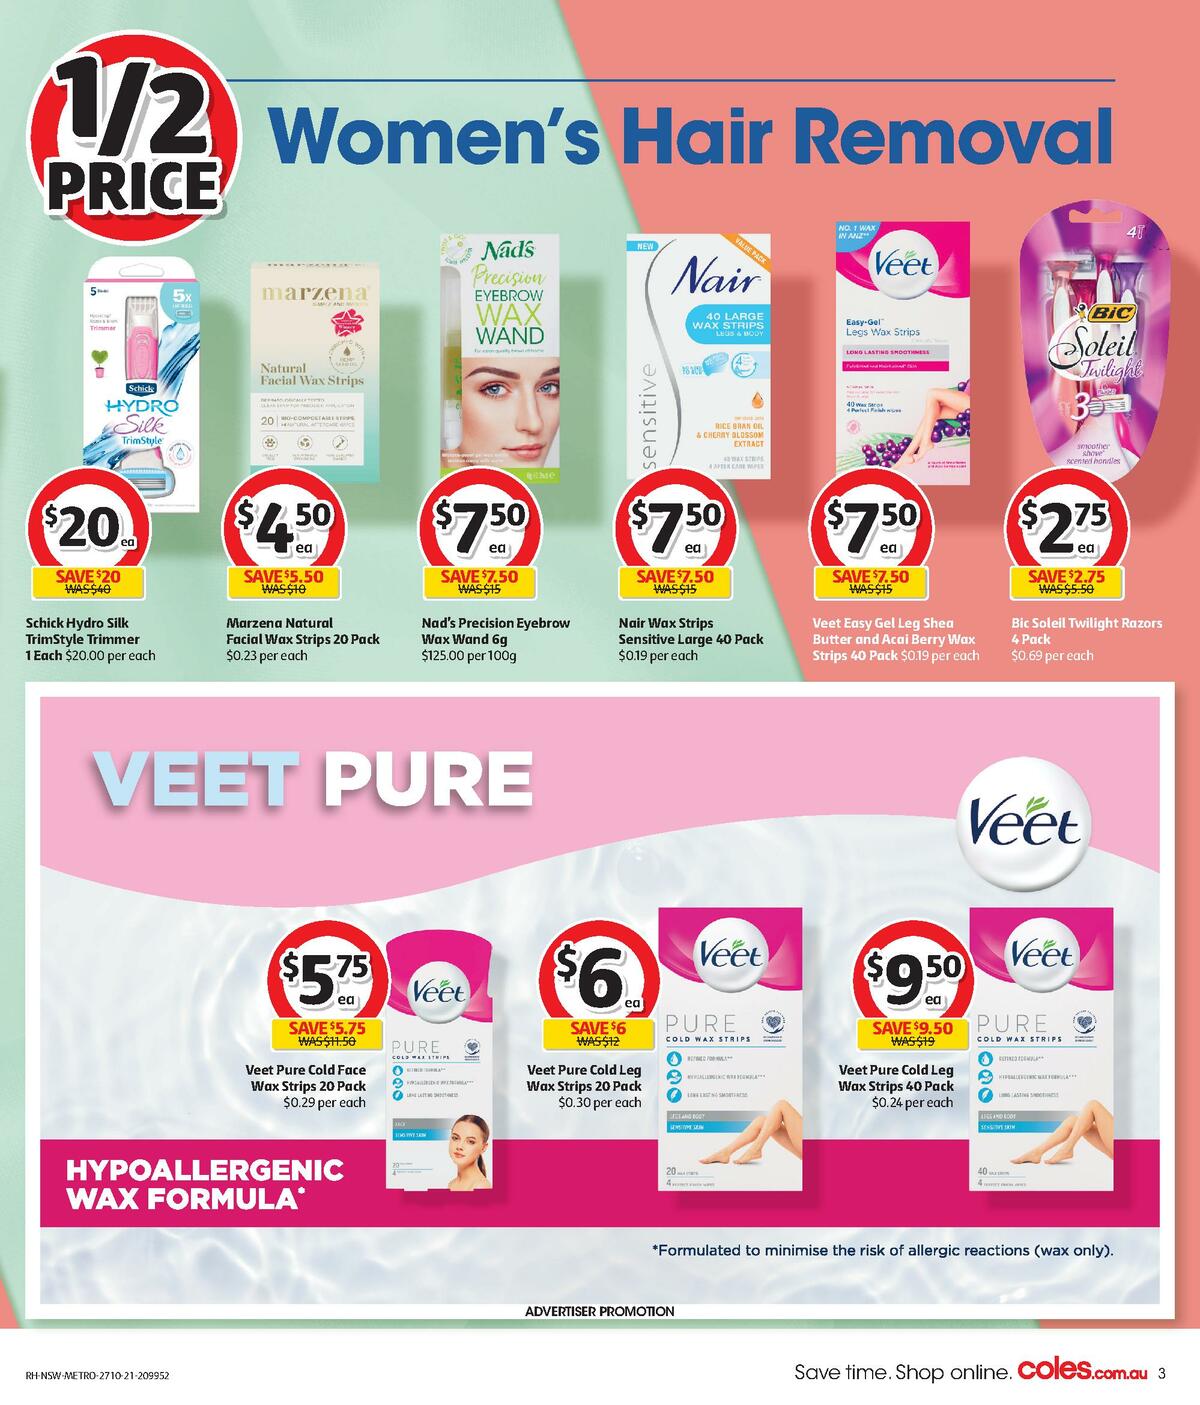 Coles Health & Beauty Catalogues from 27 October